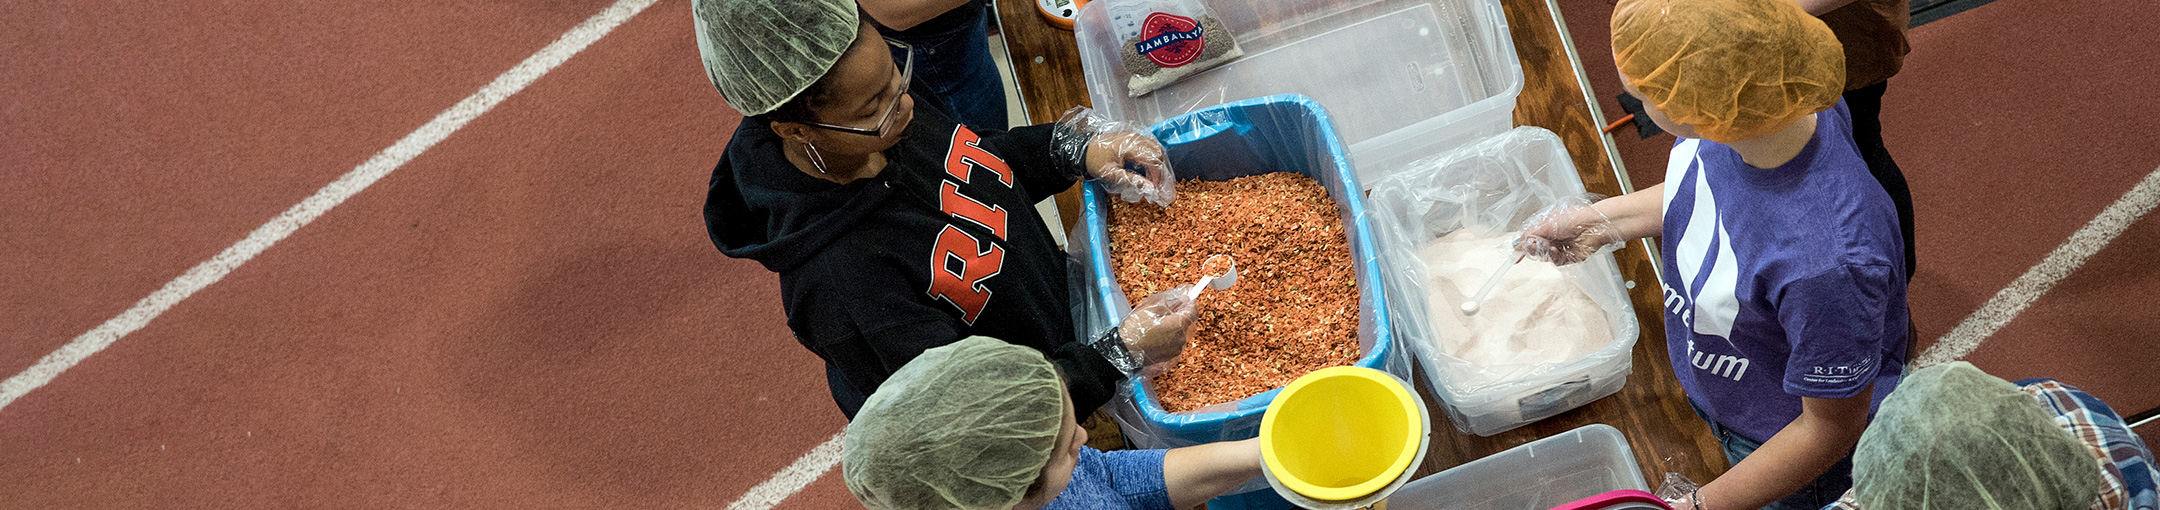 Volunteers for the Hunger Project packing food.